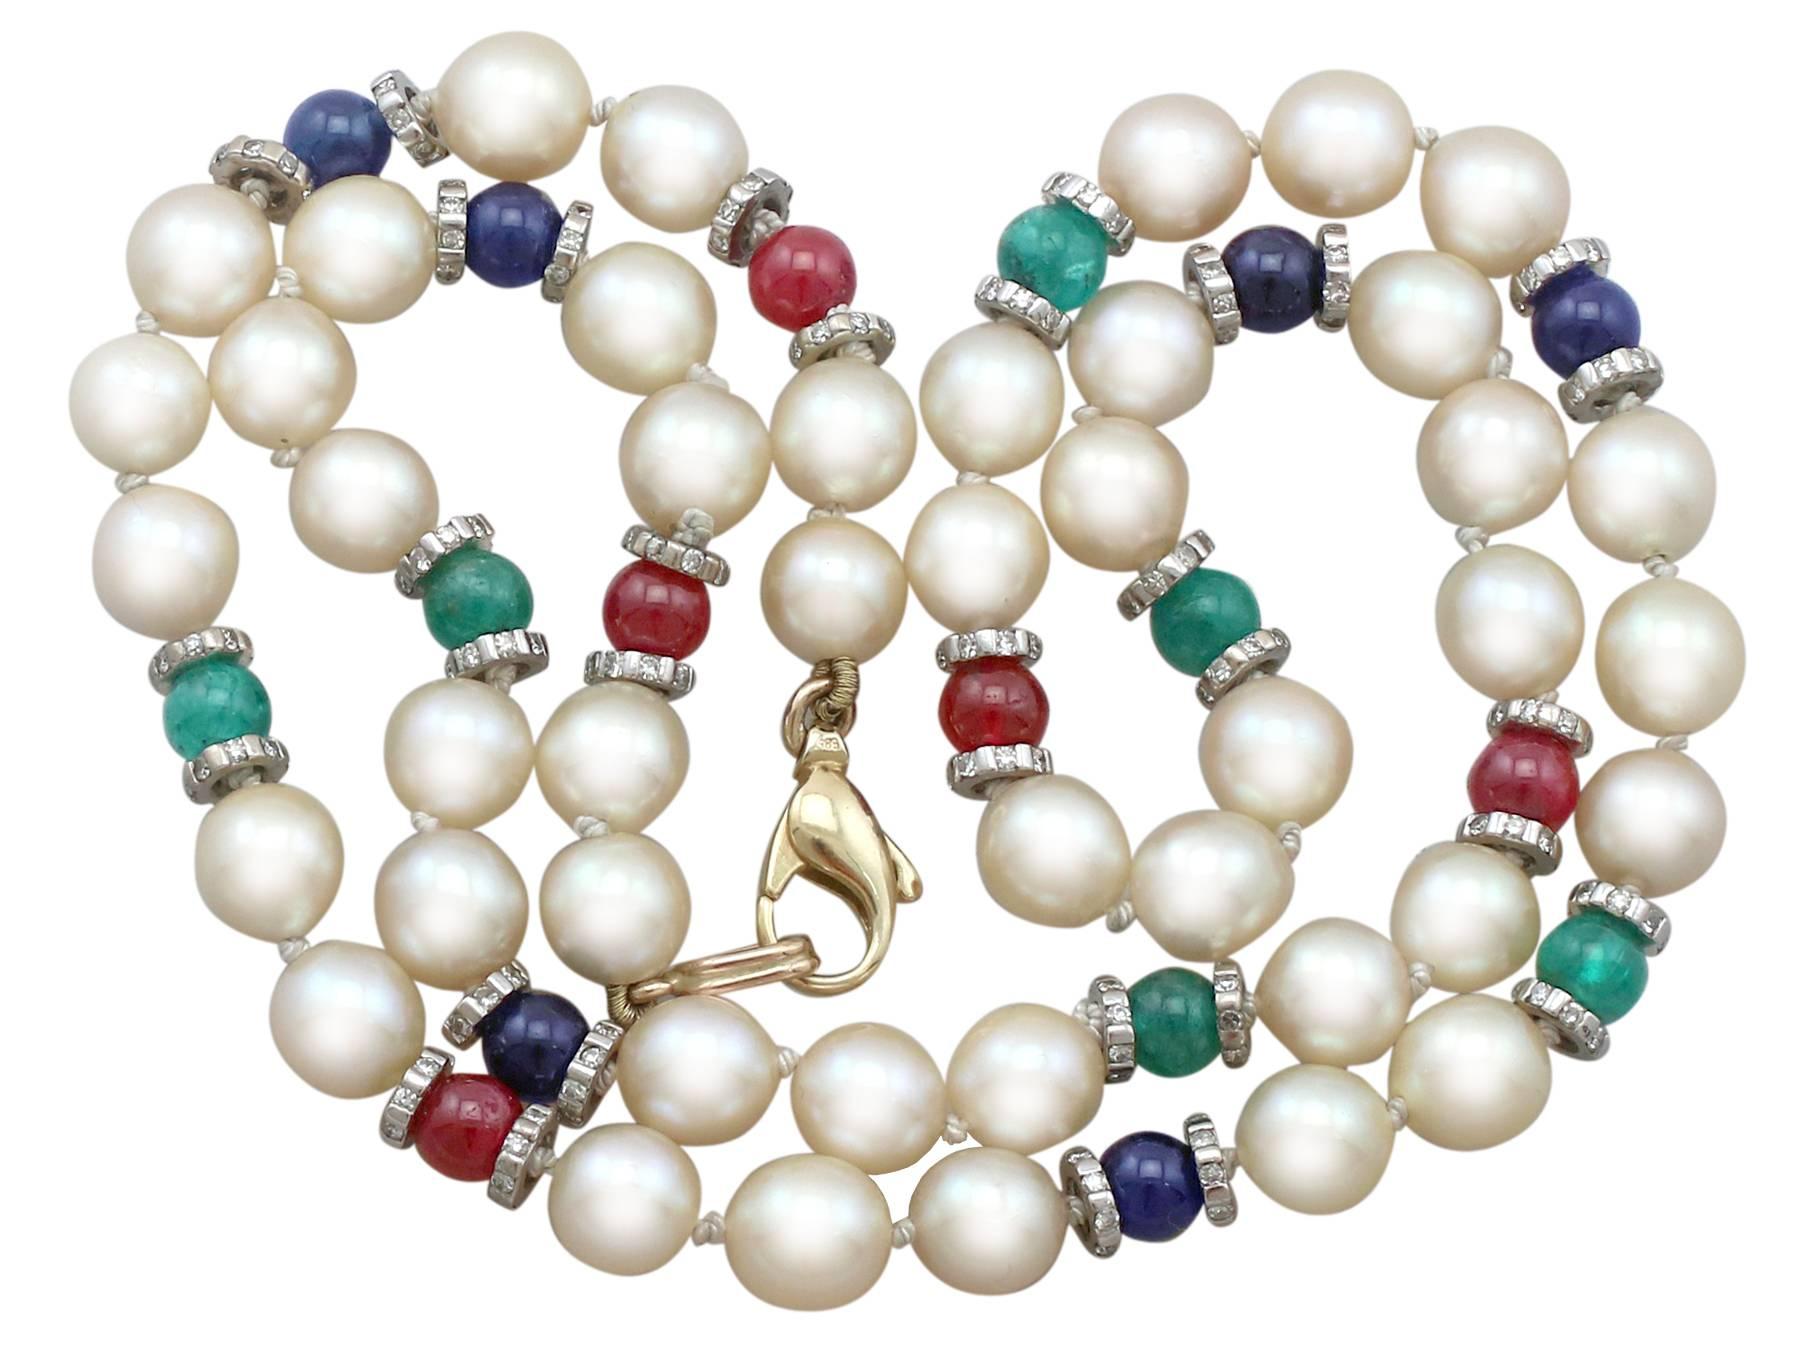 An impressive cultured pearl, 1.66Ct diamond, 8.20Ct sapphire, 7.38 Ct emerald, 7.25Ct ruby and 14k gold necklace; part of our diverse gemstone jewelry collections.

This fine and impressive pearl necklace is composed of forty-four individually